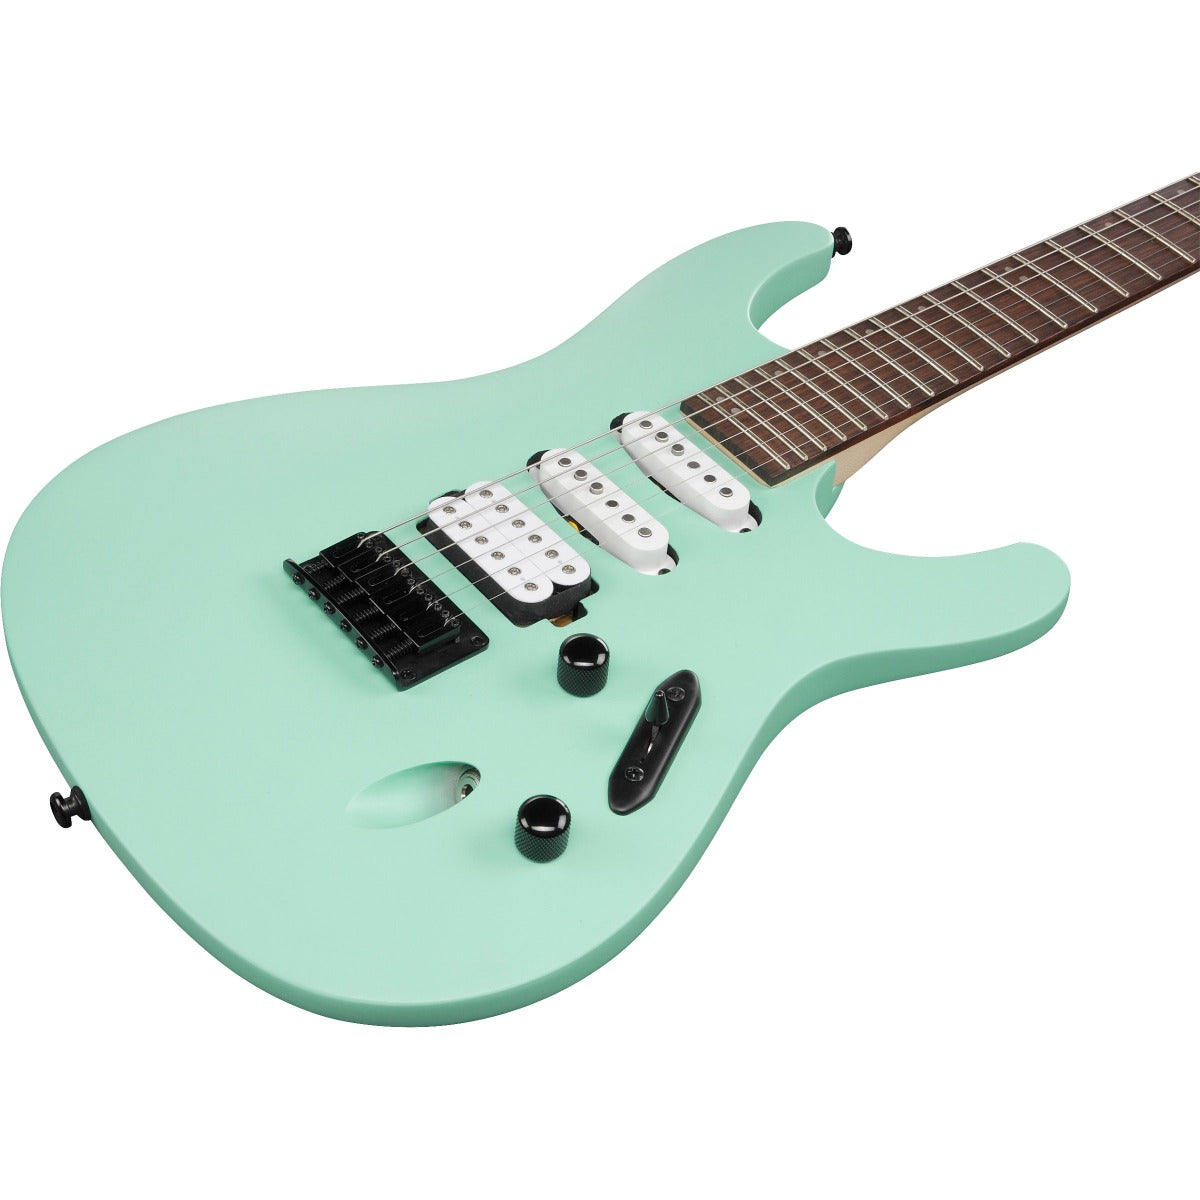 Close-up perspective view of Ibanez S561 S Standard Electric Guitar - Sea Foam Green showing top and right side of body and portion of fingerboard